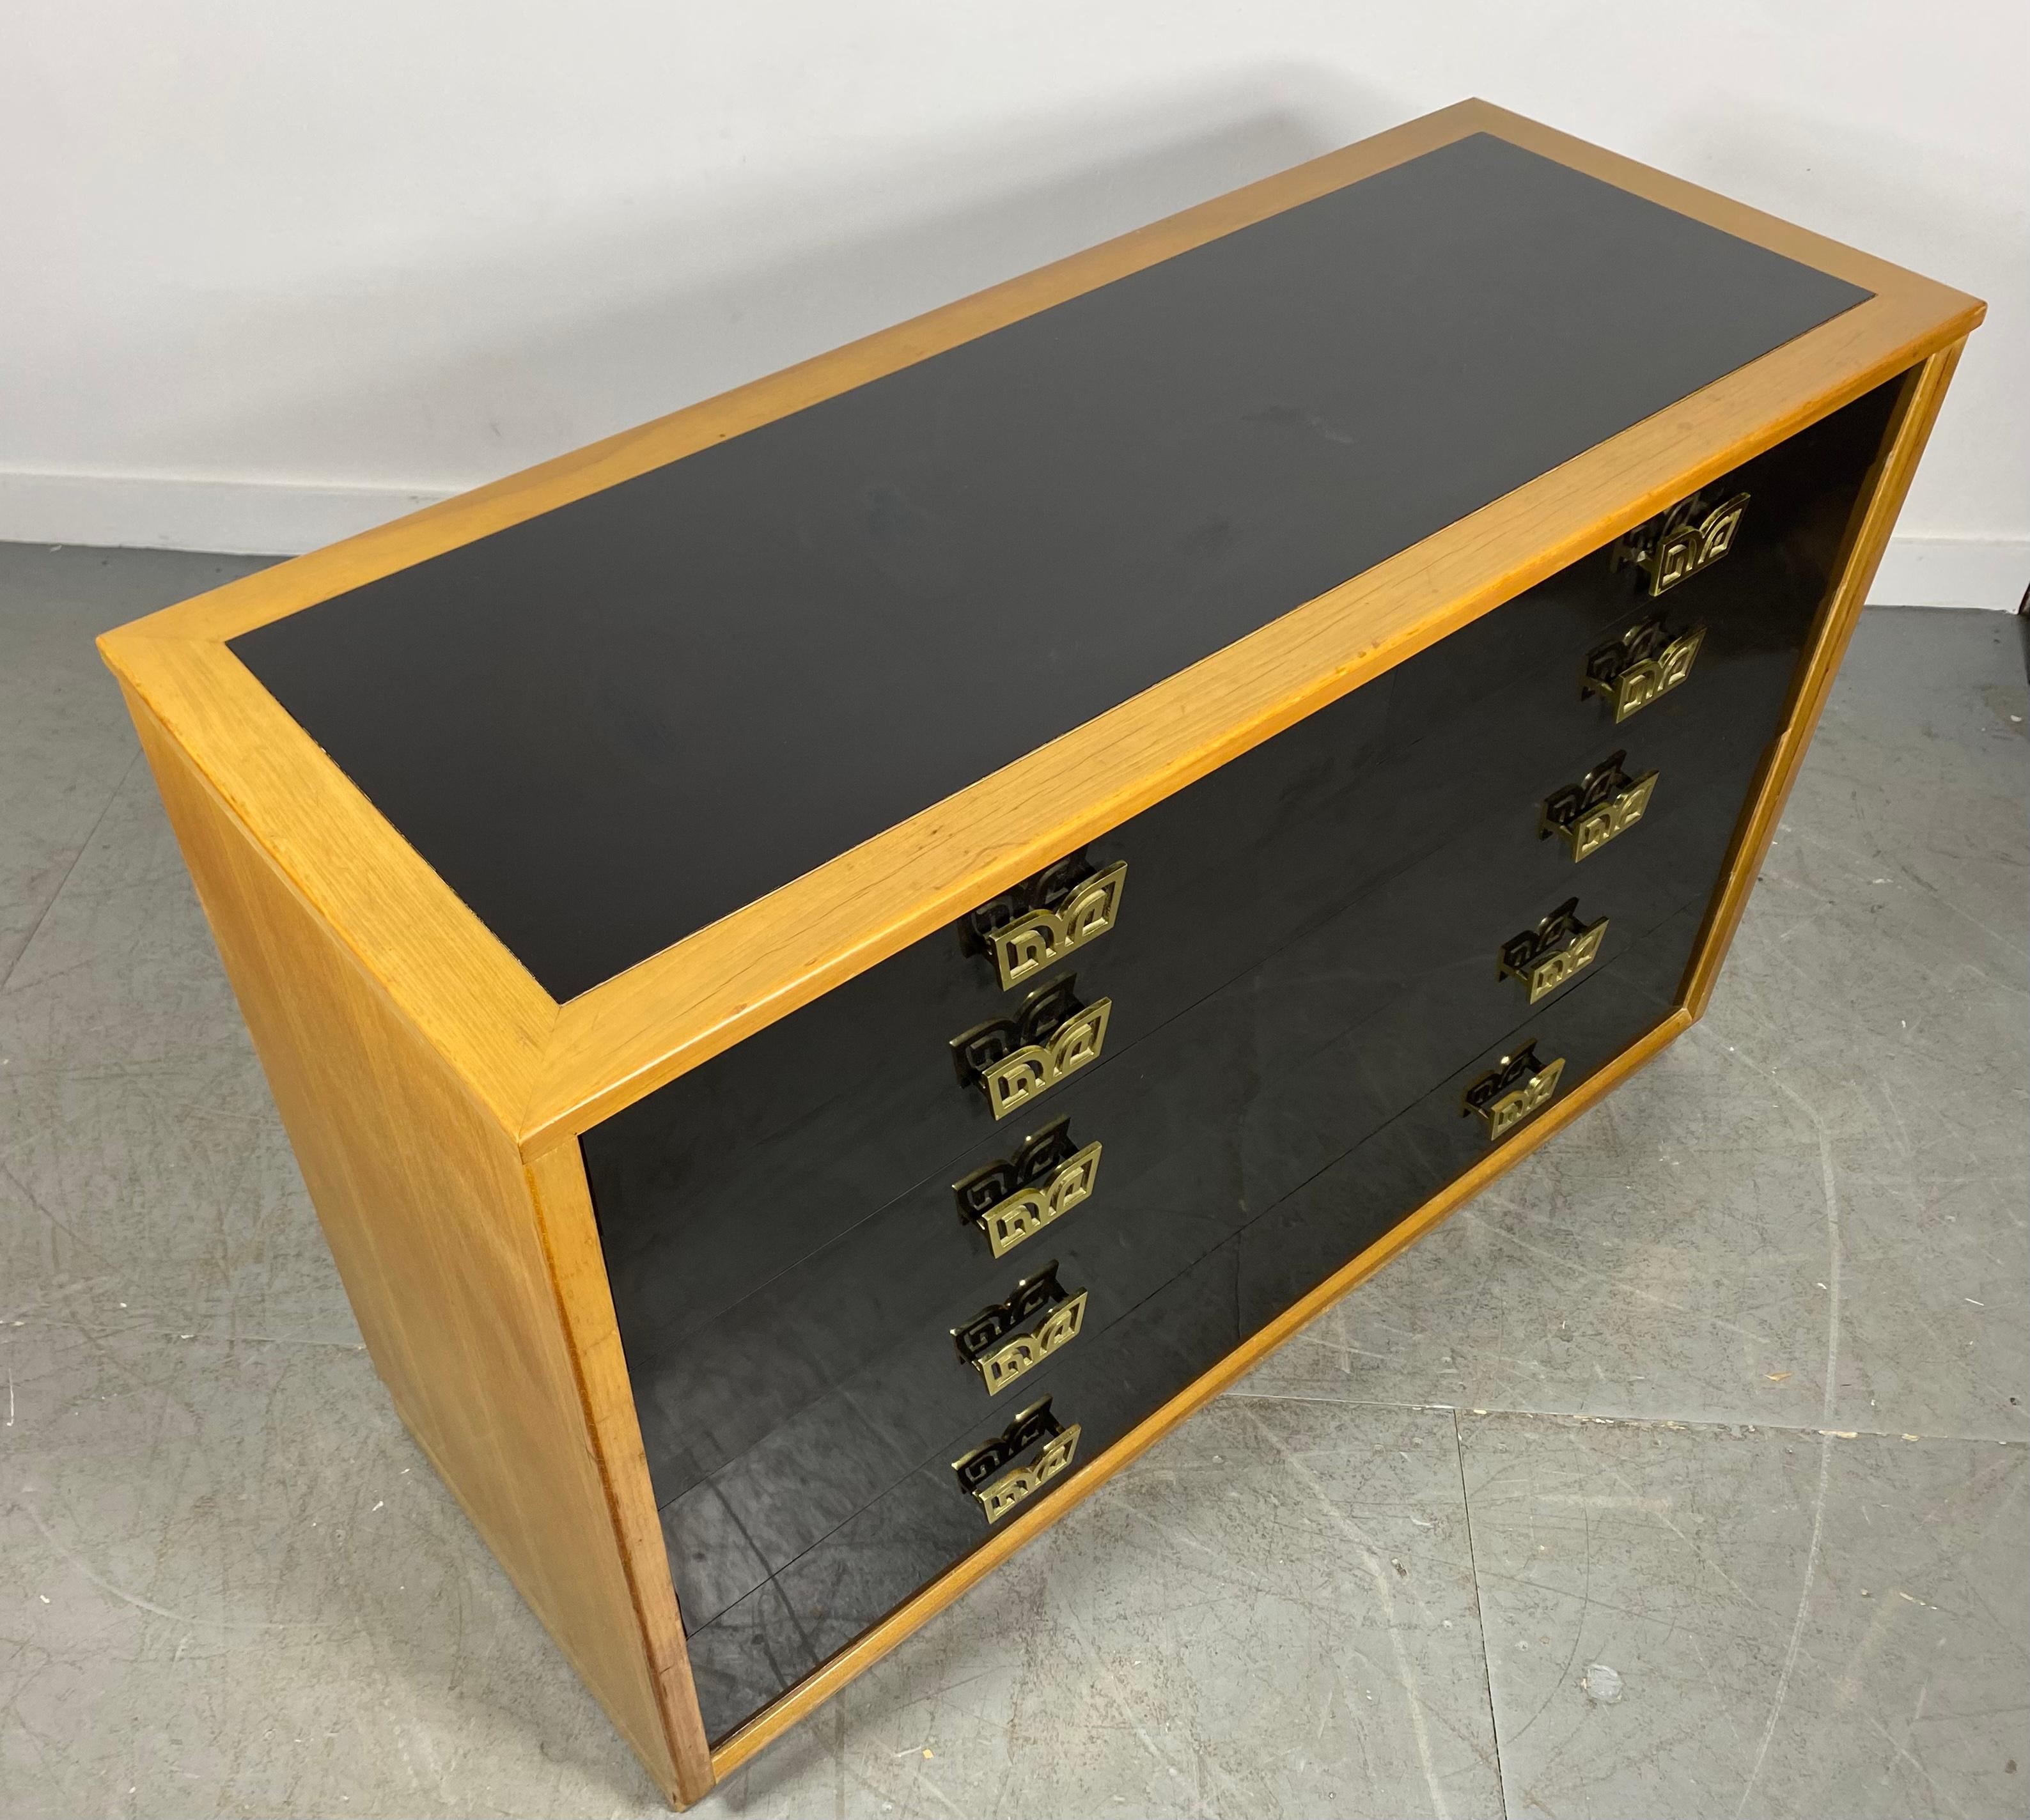  Edward Wormley Precedent Dresser for Drexel, stunning custom hardware / finish In Good Condition For Sale In Buffalo, NY